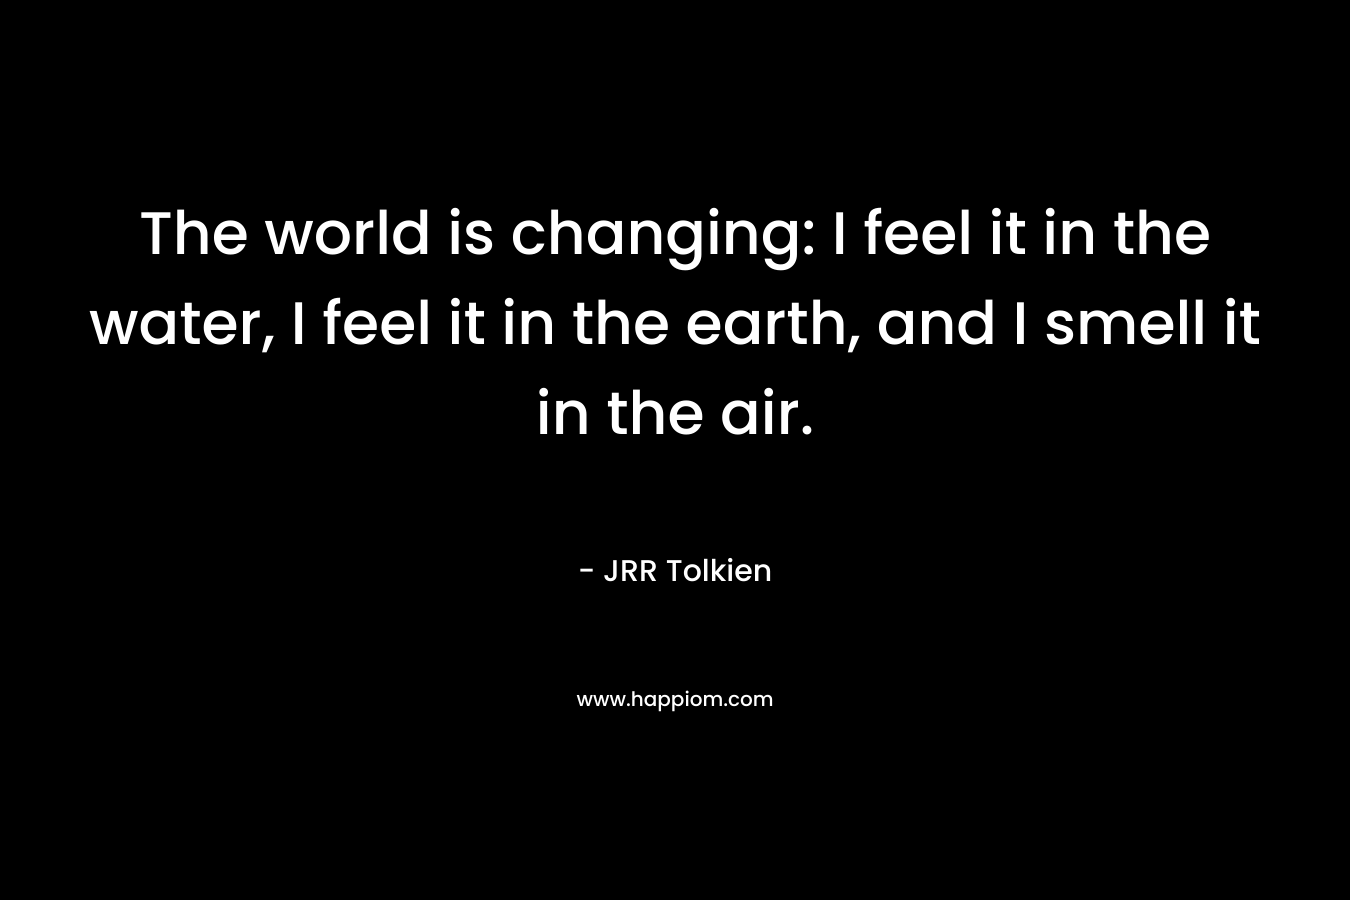 The world is changing: I feel it in the water, I feel it in the earth, and I smell it in the air.